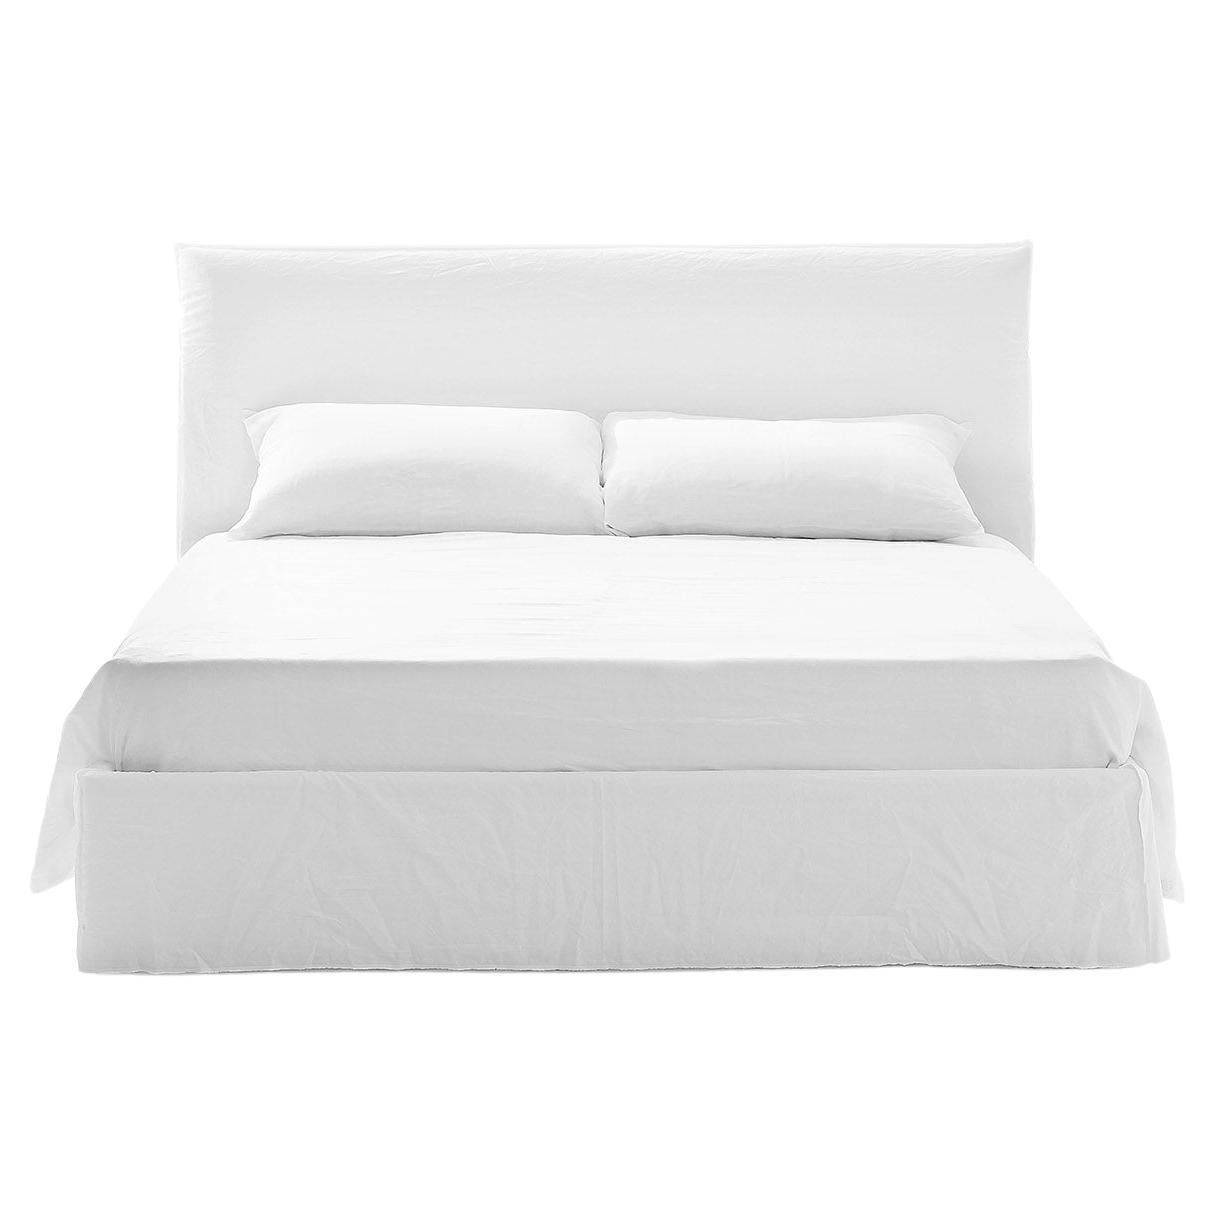 Gervasoni Ghost 80 G Knock Down Bed in White Linen Upholstery by Paola Navone For Sale